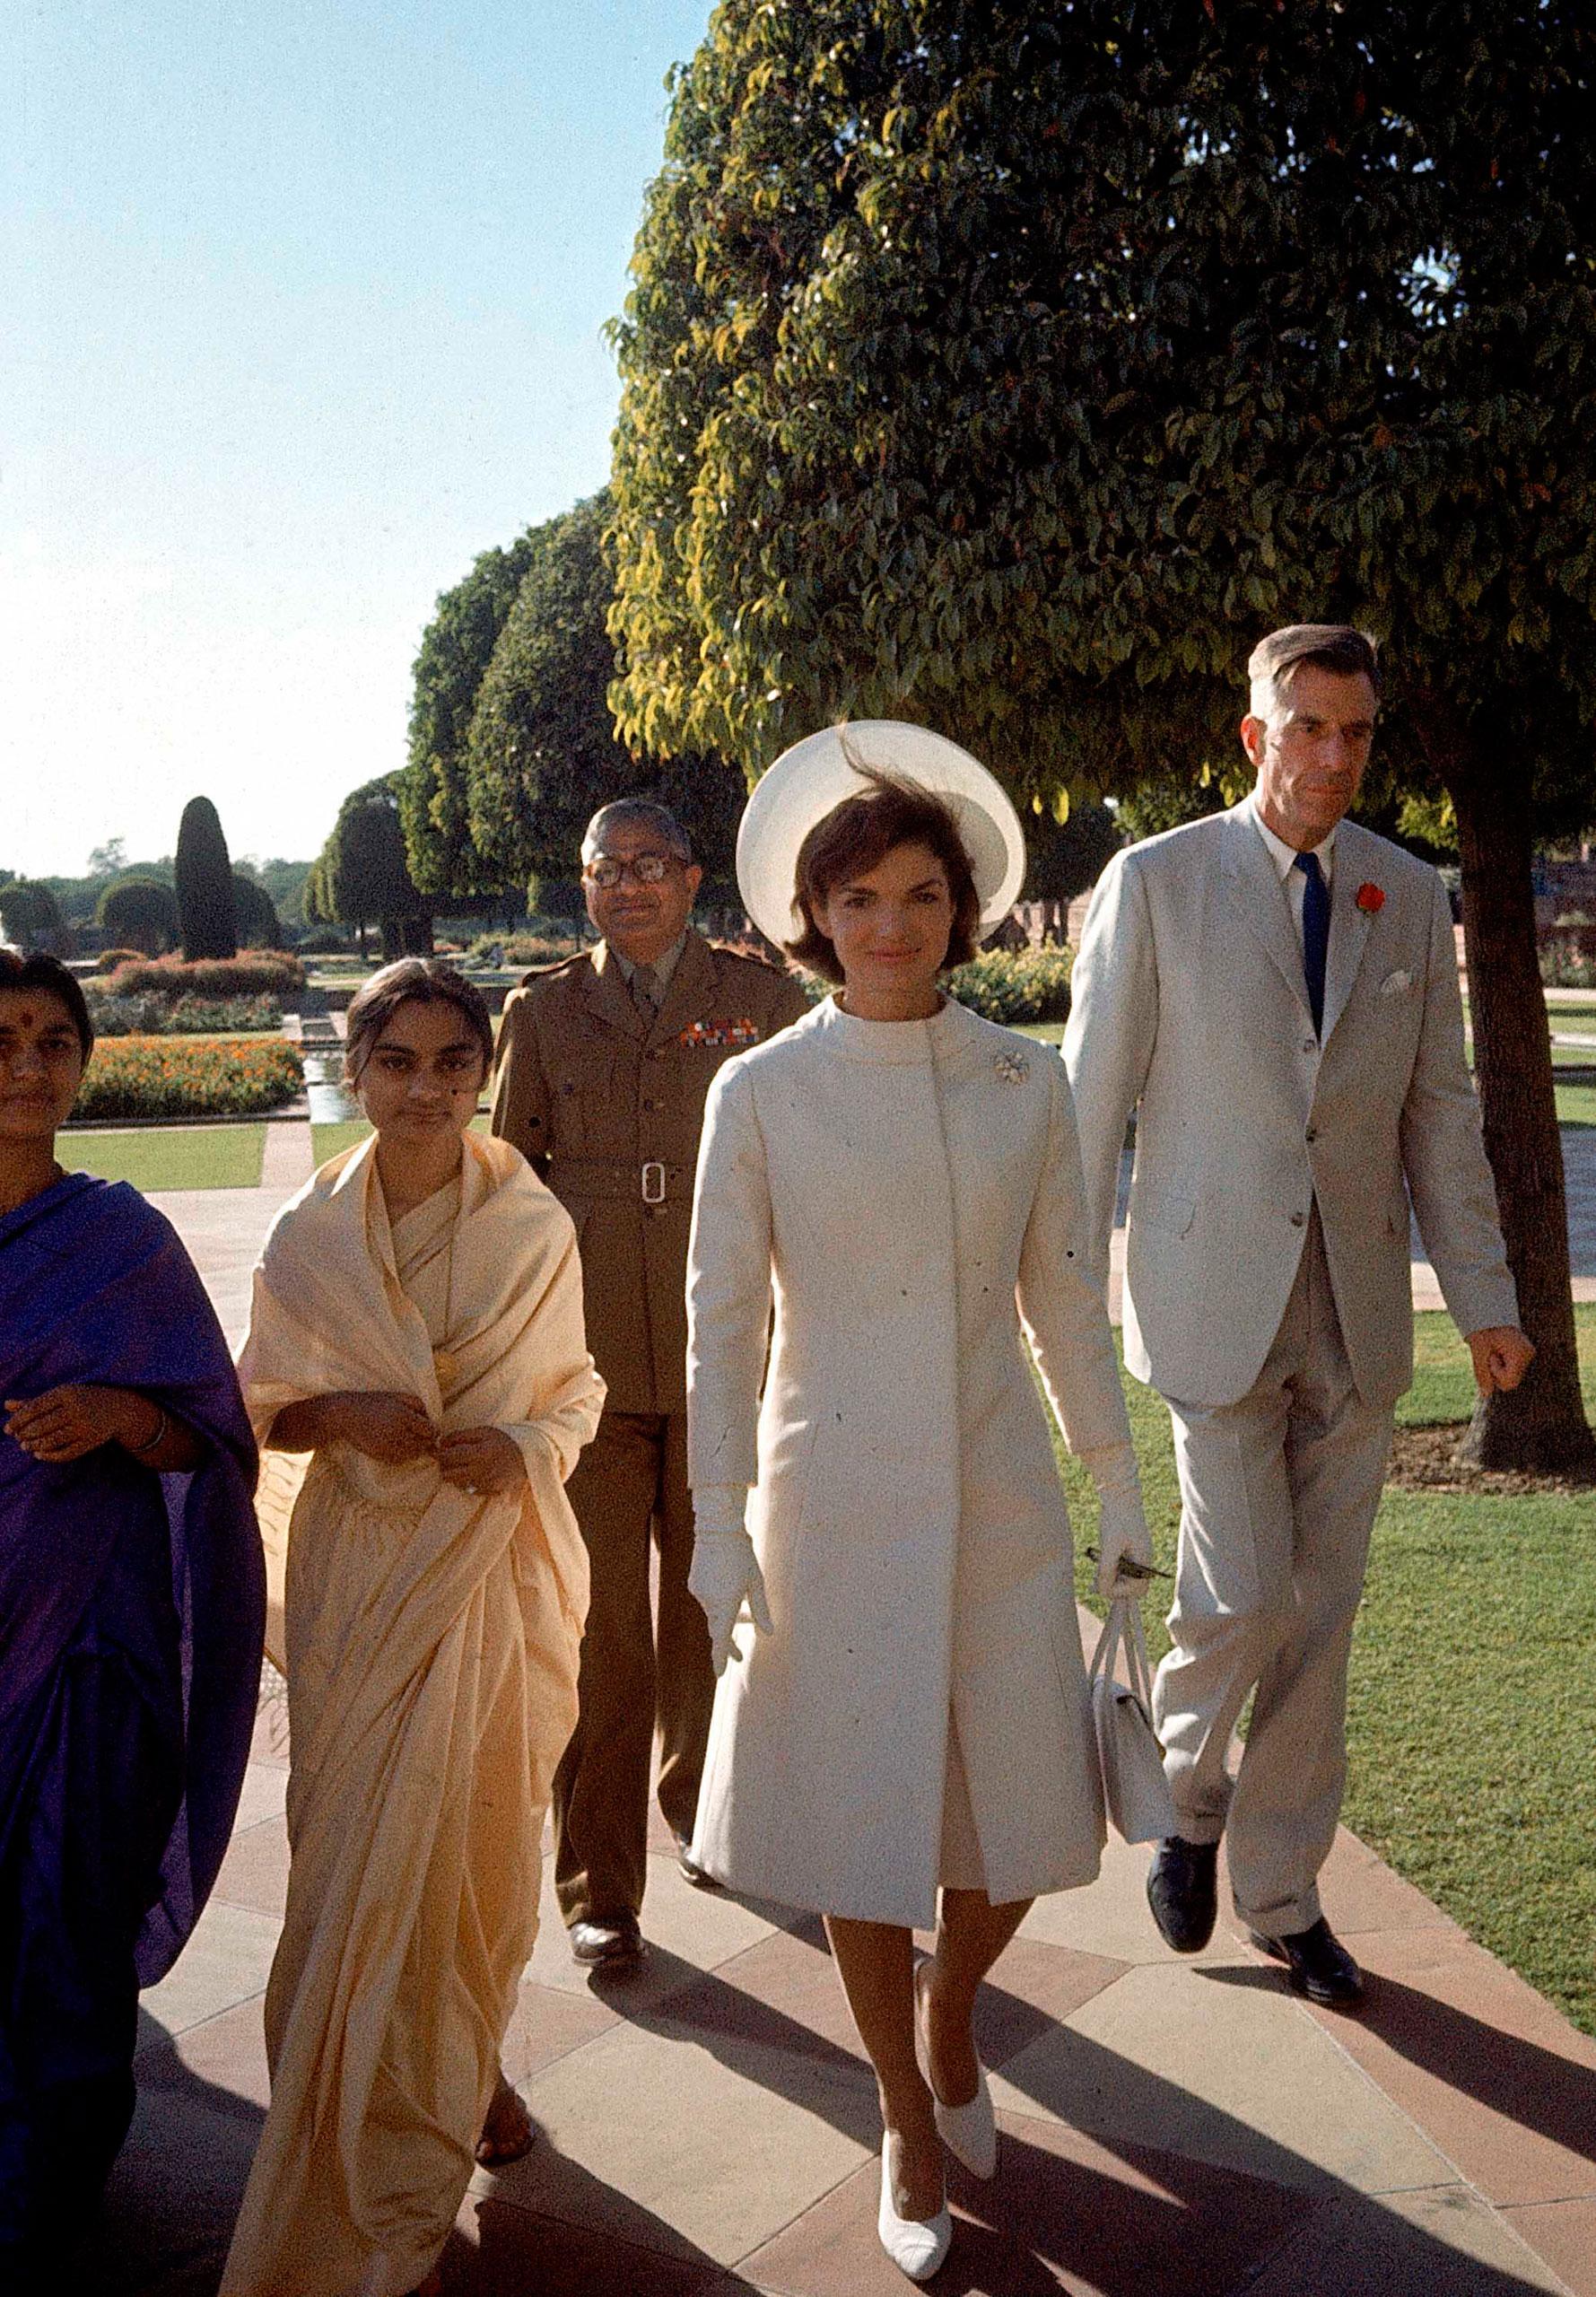 First Lady Jackie Kennedy, center, in a white coat and hat walks with Ambassador John Galbrath, right, in India in 1962.